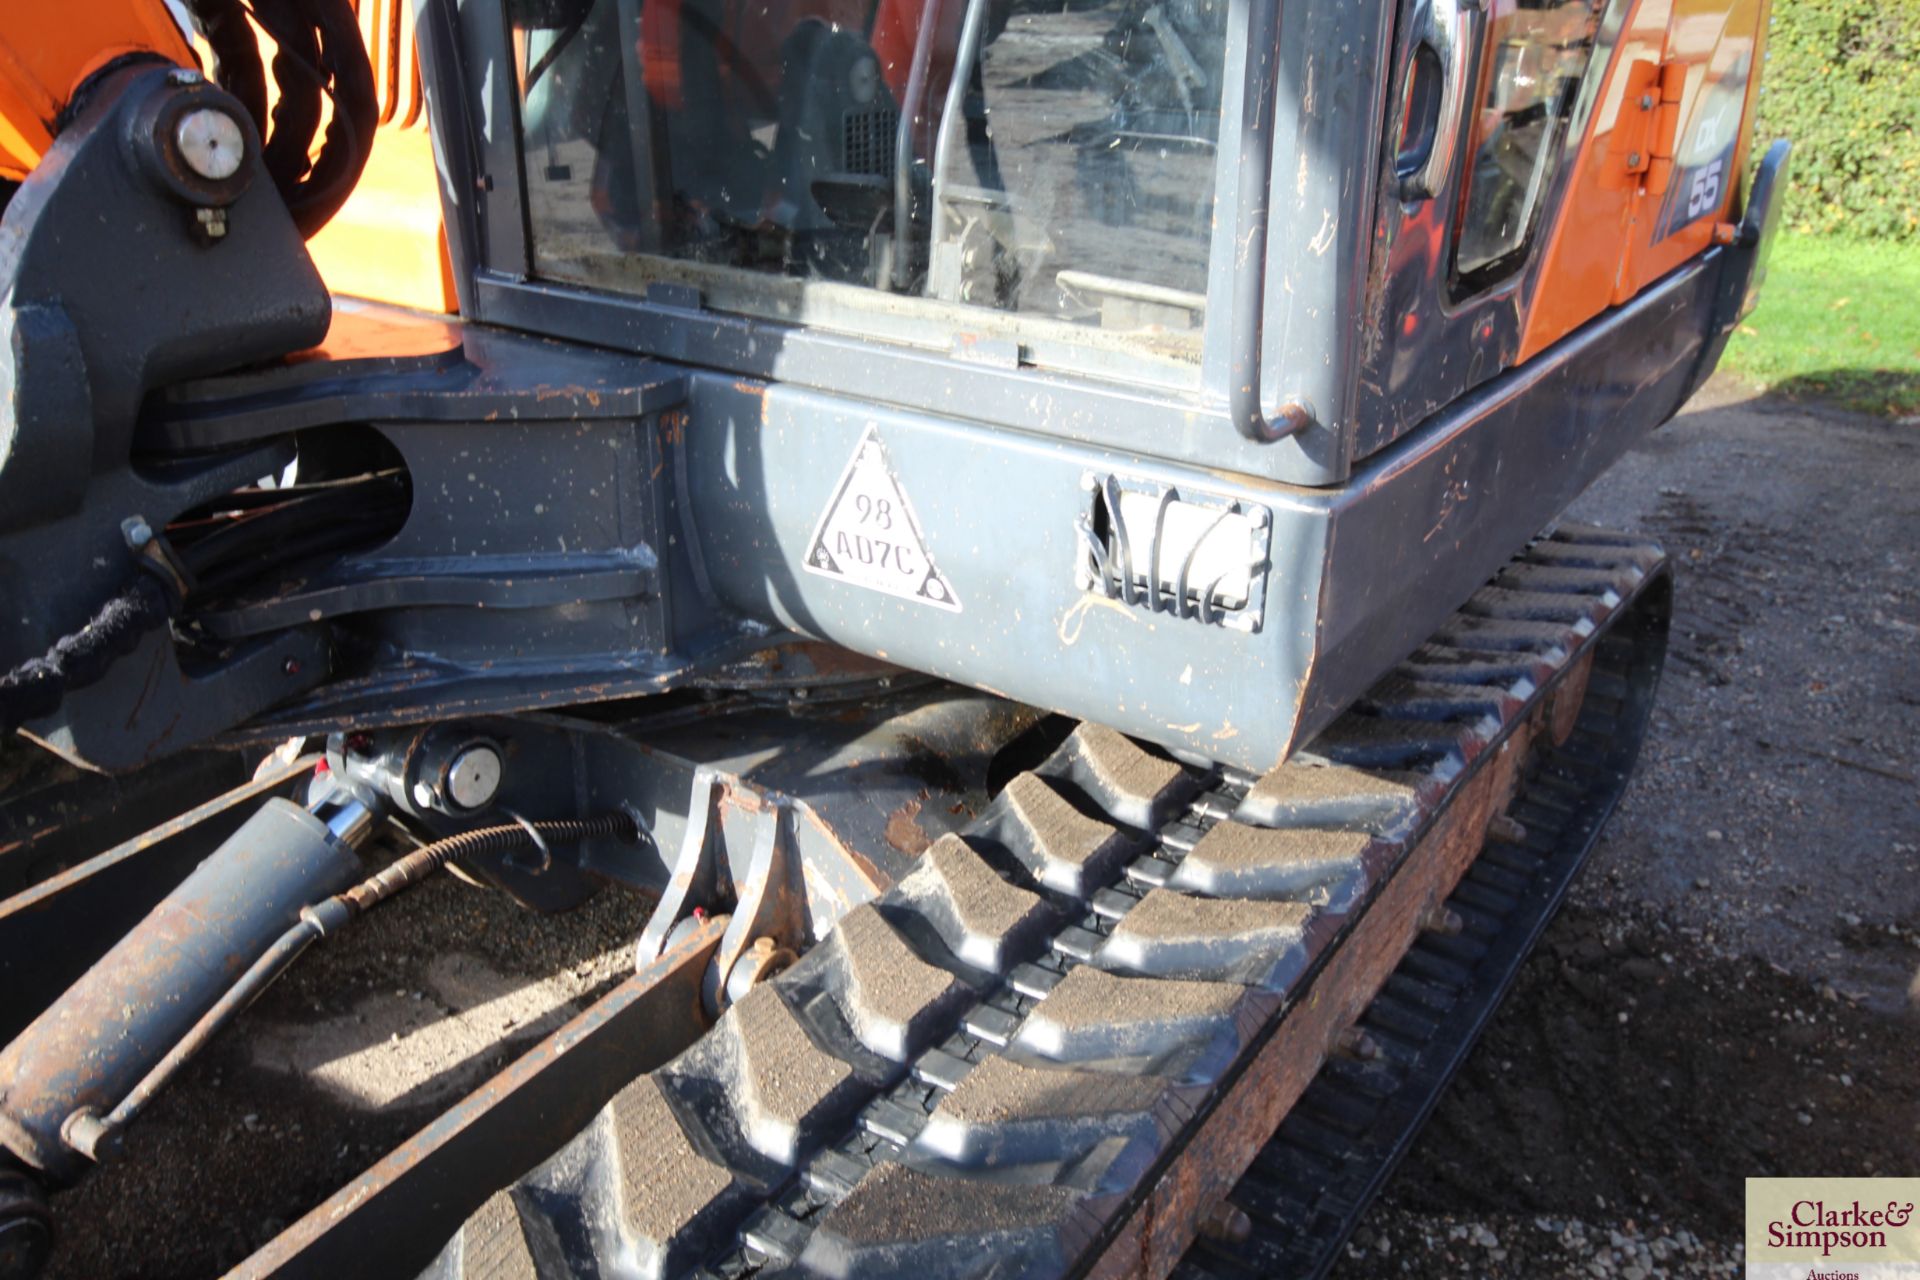 Doosan DX55E 5.5T excavator. 2011. 5,045 hours. Serial number 50461. With new rubber tracks 50 hours - Image 19 of 68